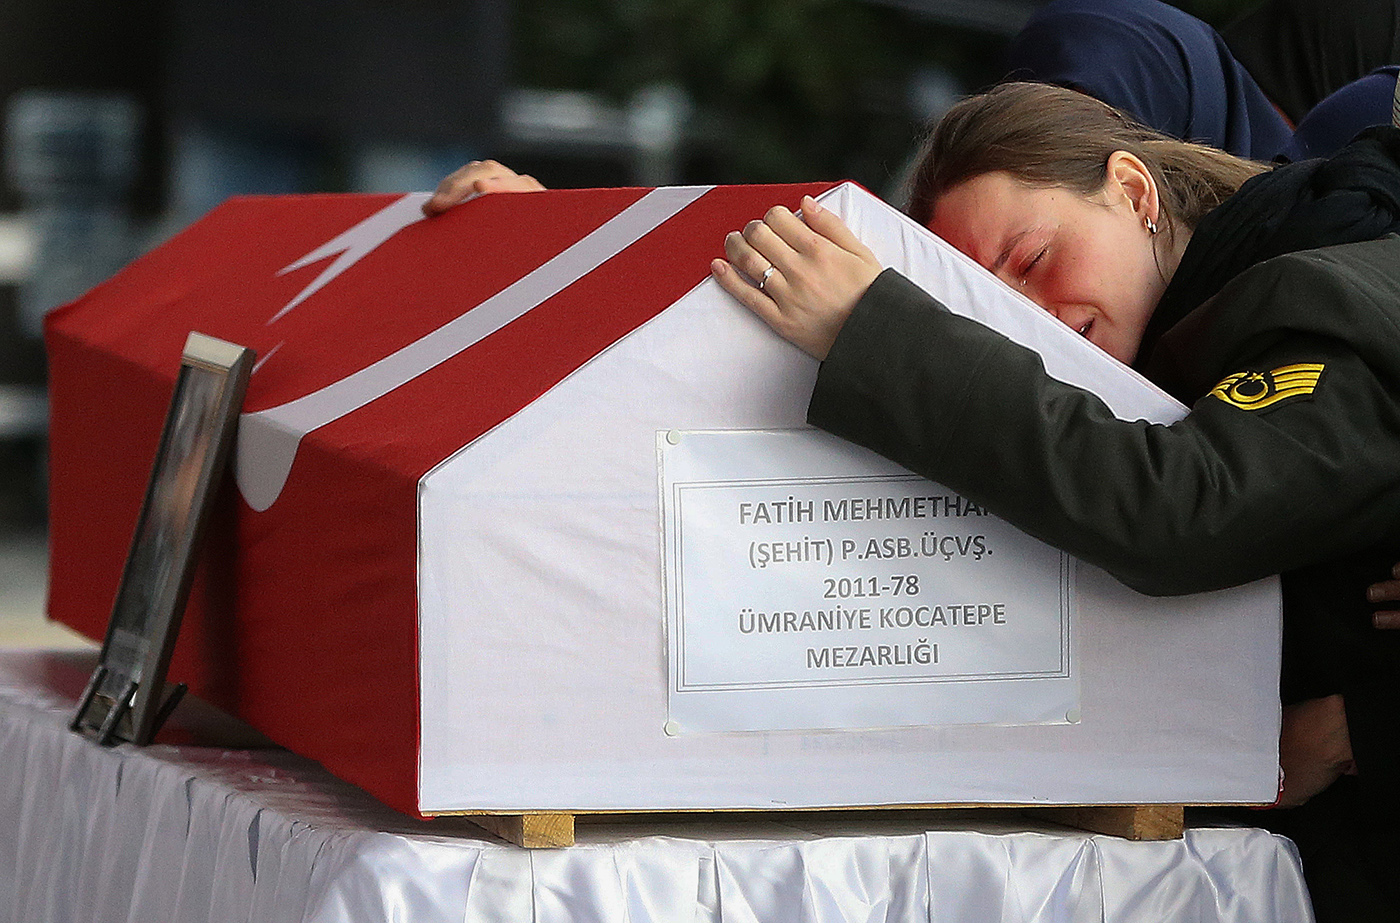 Wife Gamze Mehmethan of Fatih Mehmethan, a Turkish soldier who was killed in a cross-border clashes Kurdish Popular Protection Units (YPG) forces at Afrin, mourn over his coffin during a funeral ceremony in Istanbul, Turkey, 28 January 2018.